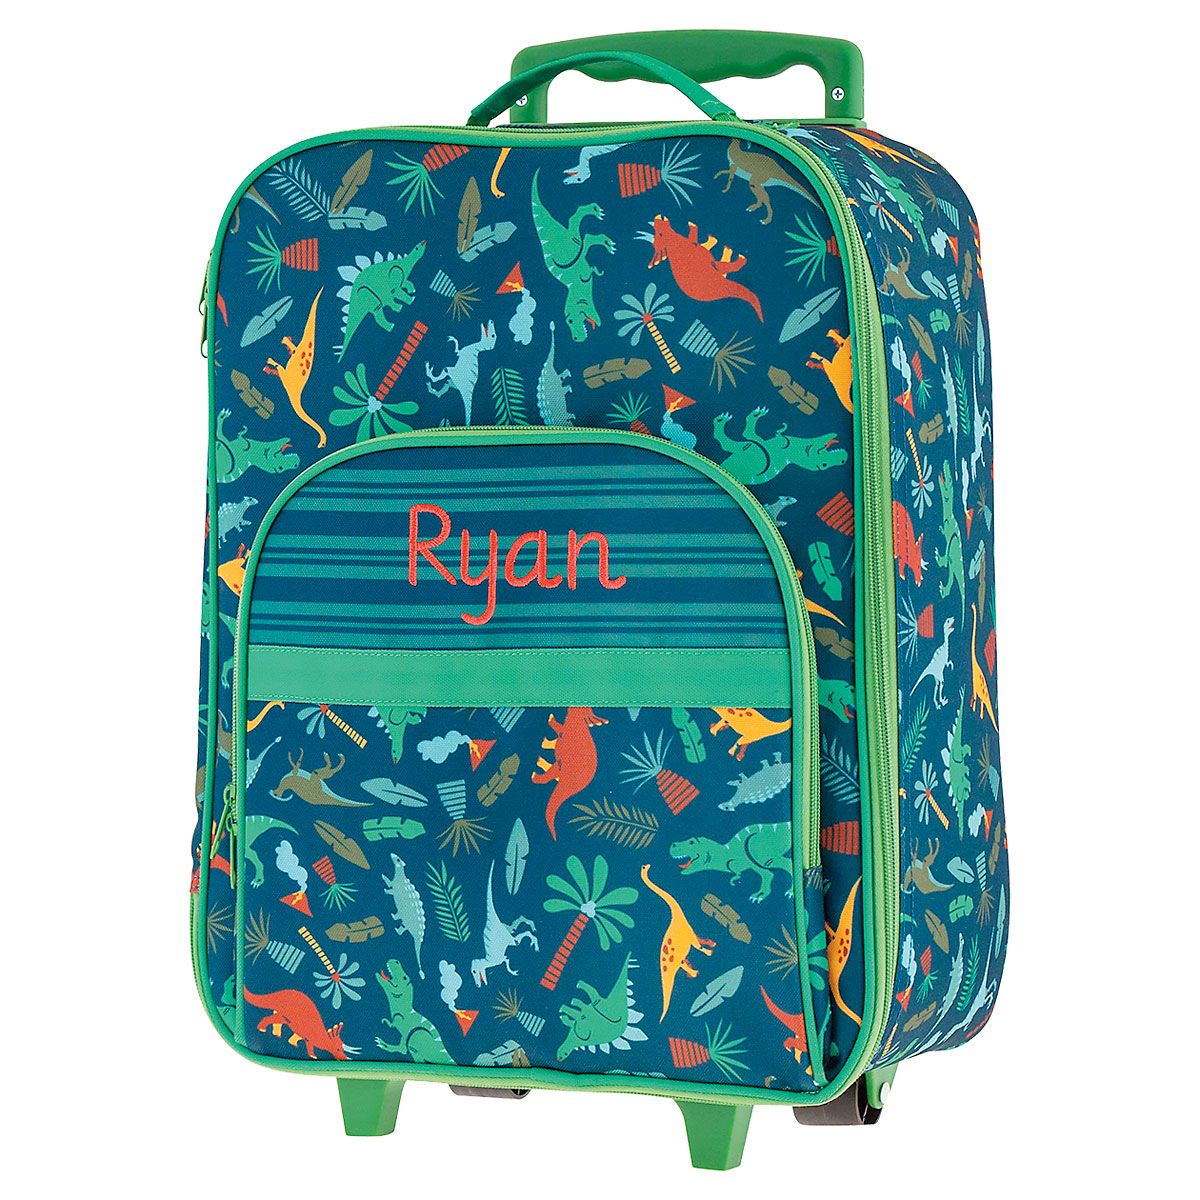 All-Over Dino 18" Rolling Luggage by Stephen Joseph